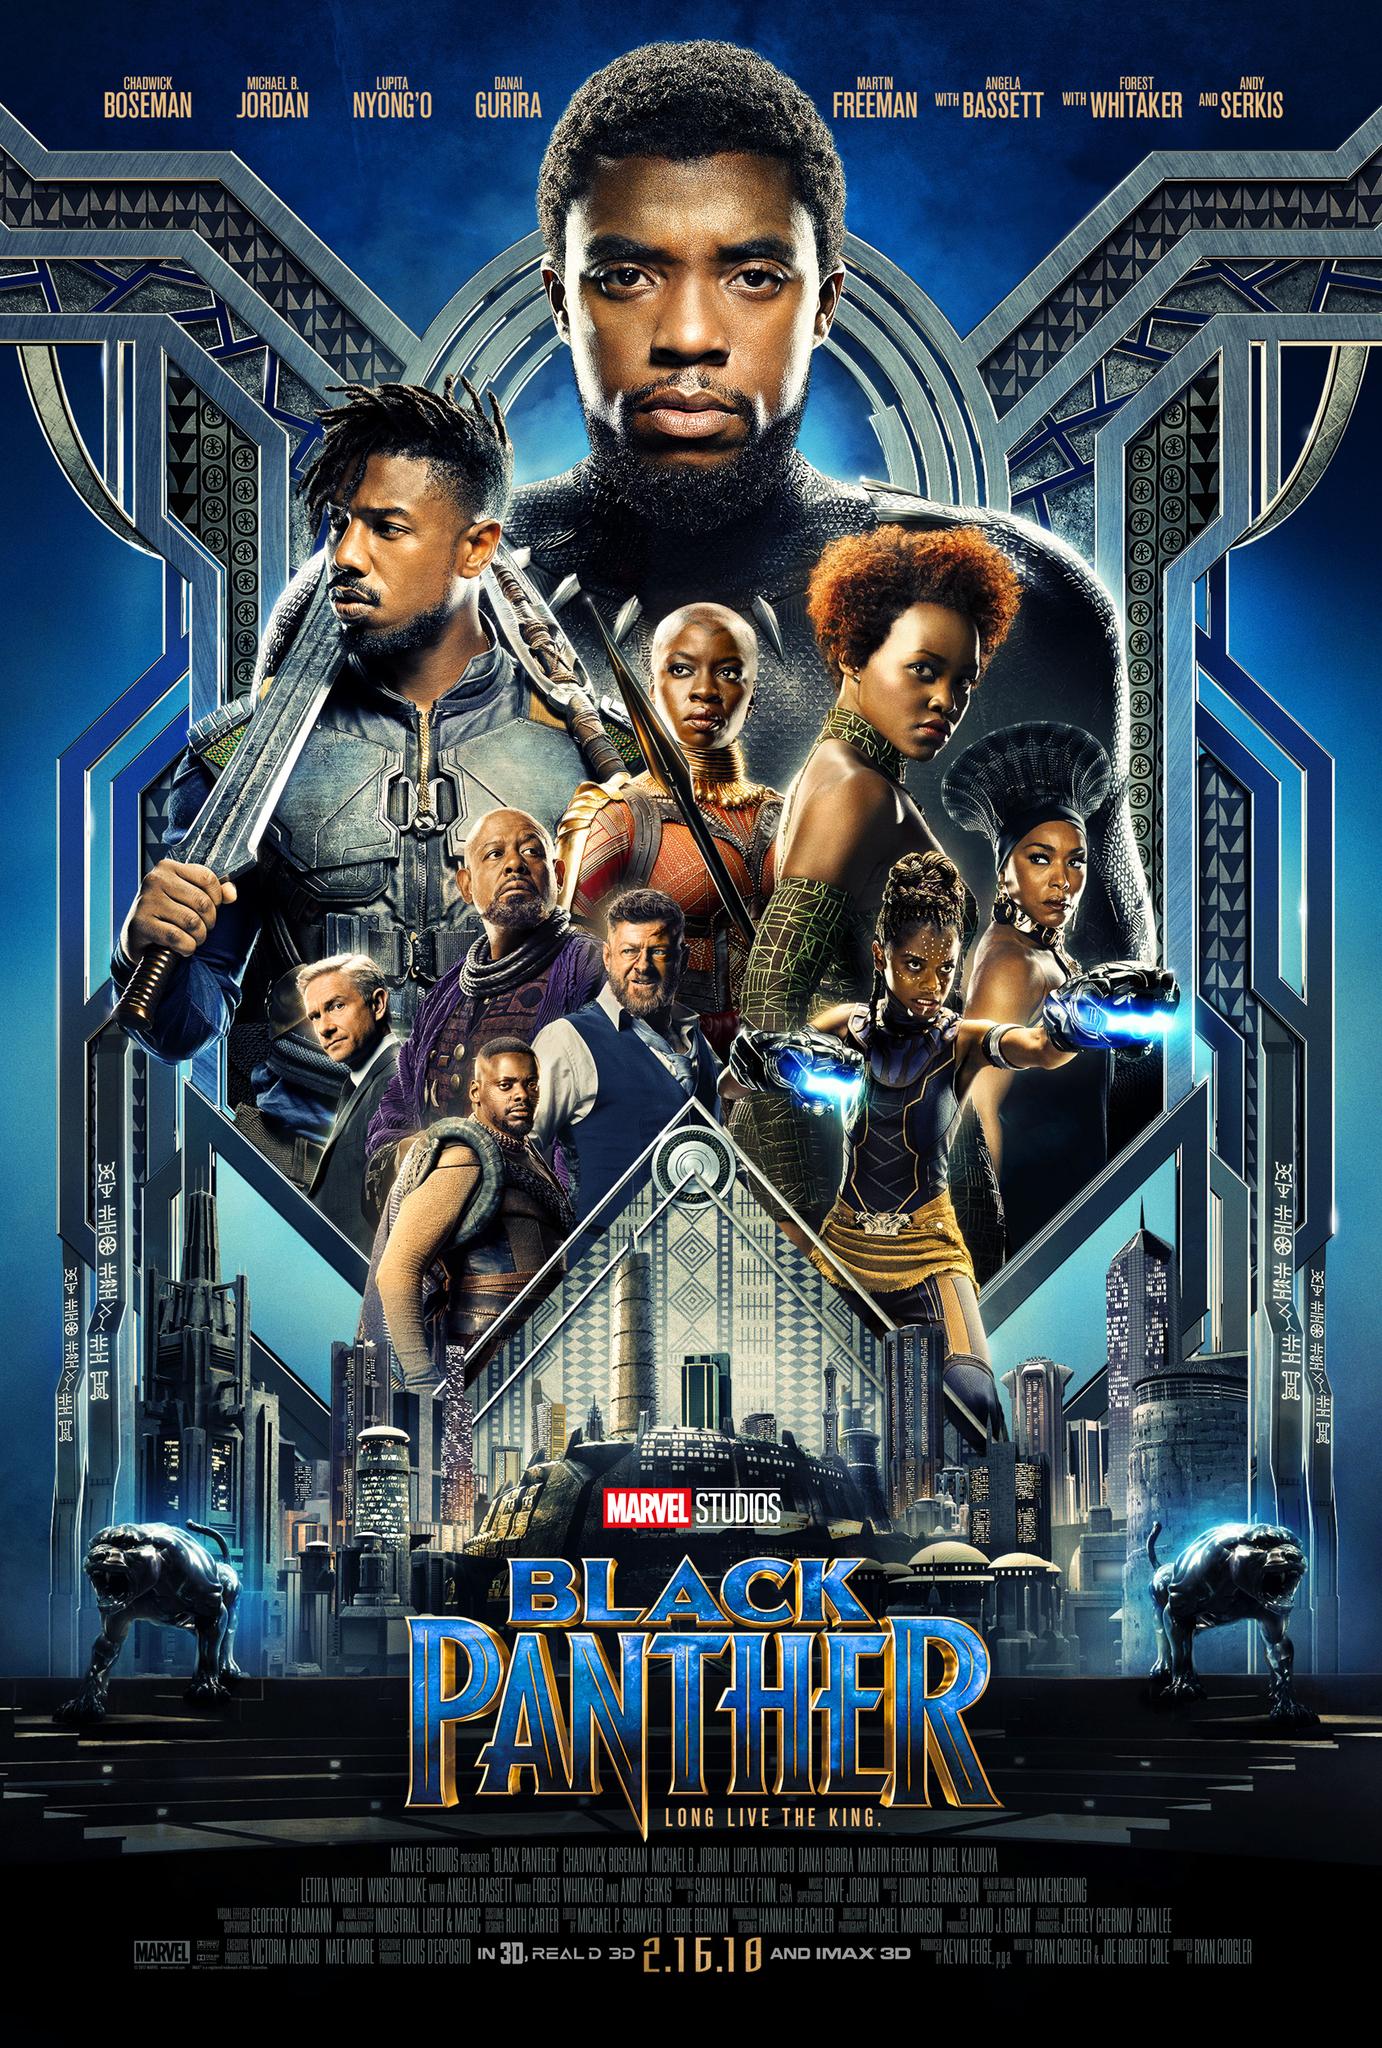 Black Panther (February 16, 2018) - Discover the vibrant and technologically advanced nation of Wakanda as T'Challa takes on the mantle of the Black Panther and faces his nation's past.